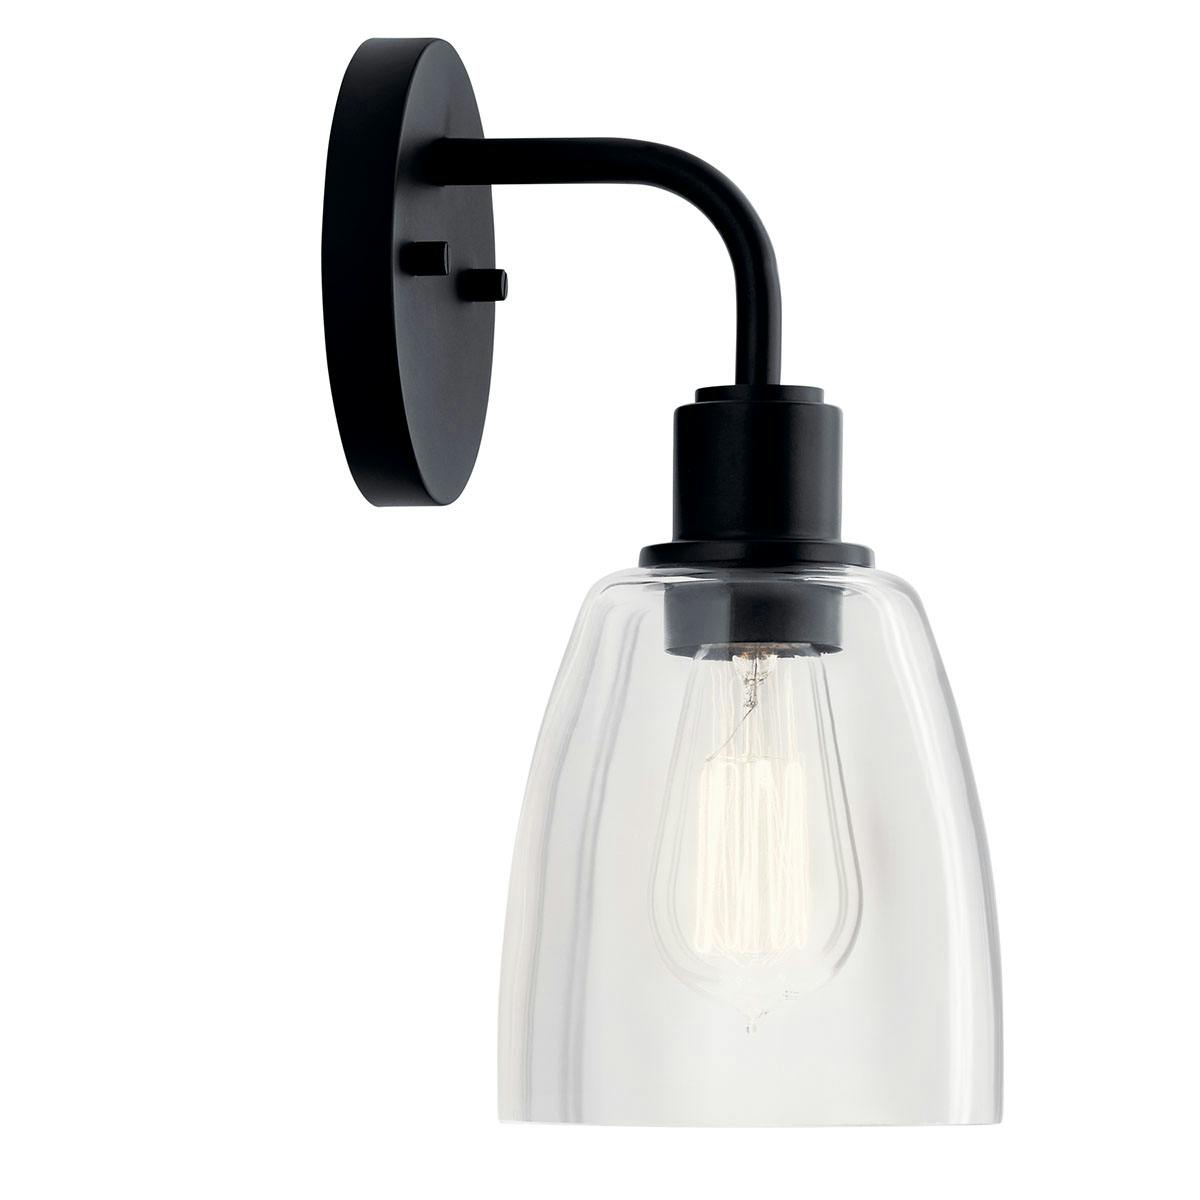 Profile view of the Meller 11" 1 Light Sconce Black on a white background